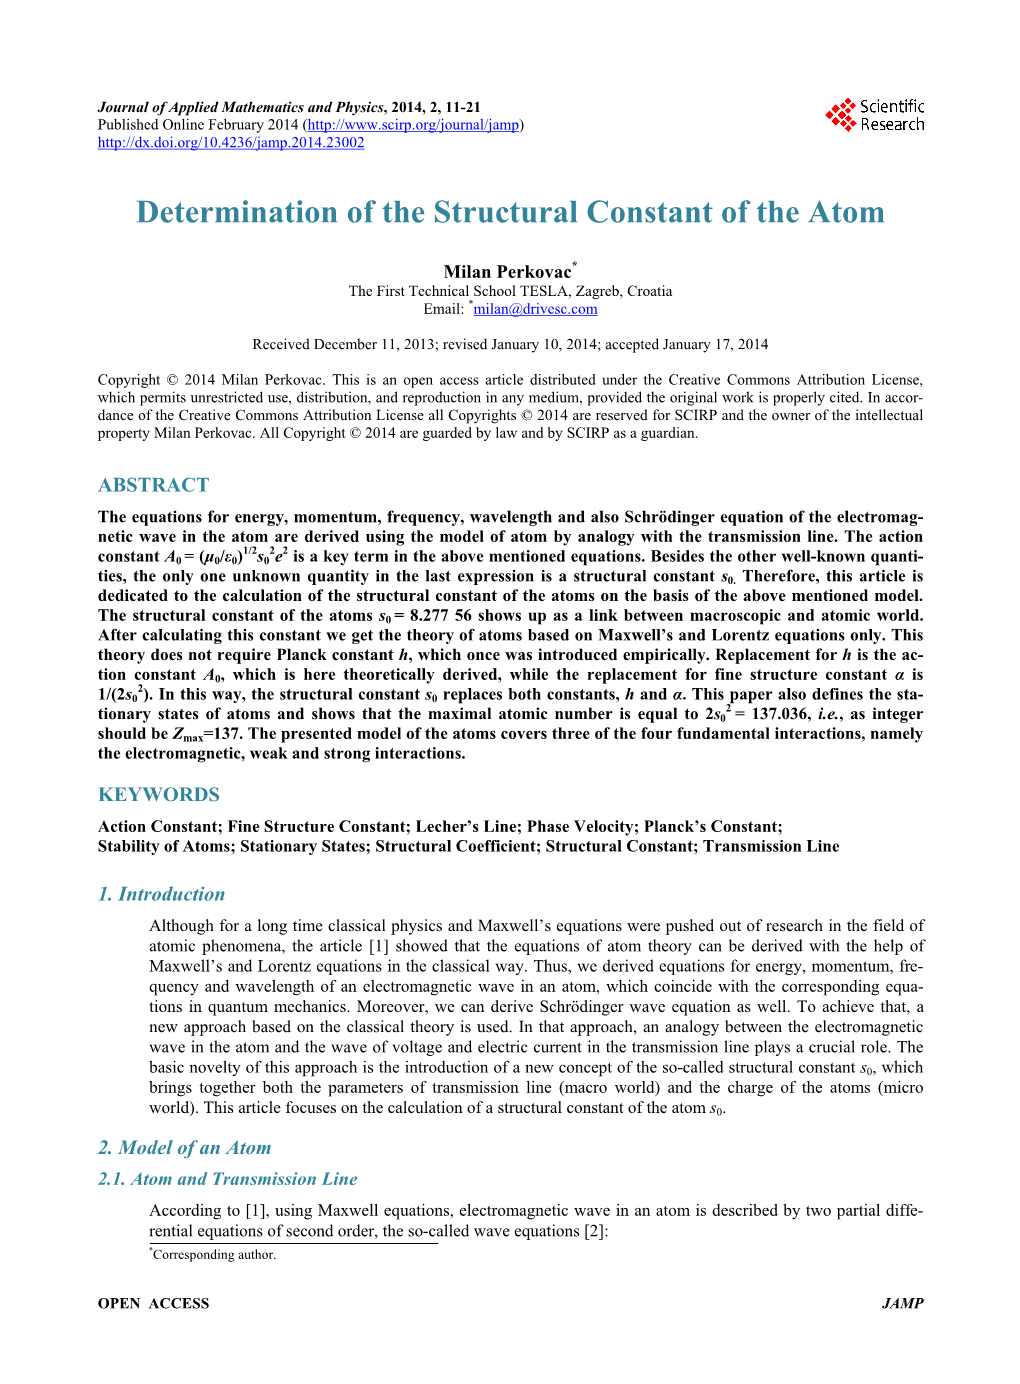 Determination of the Structural Constant of the Atom